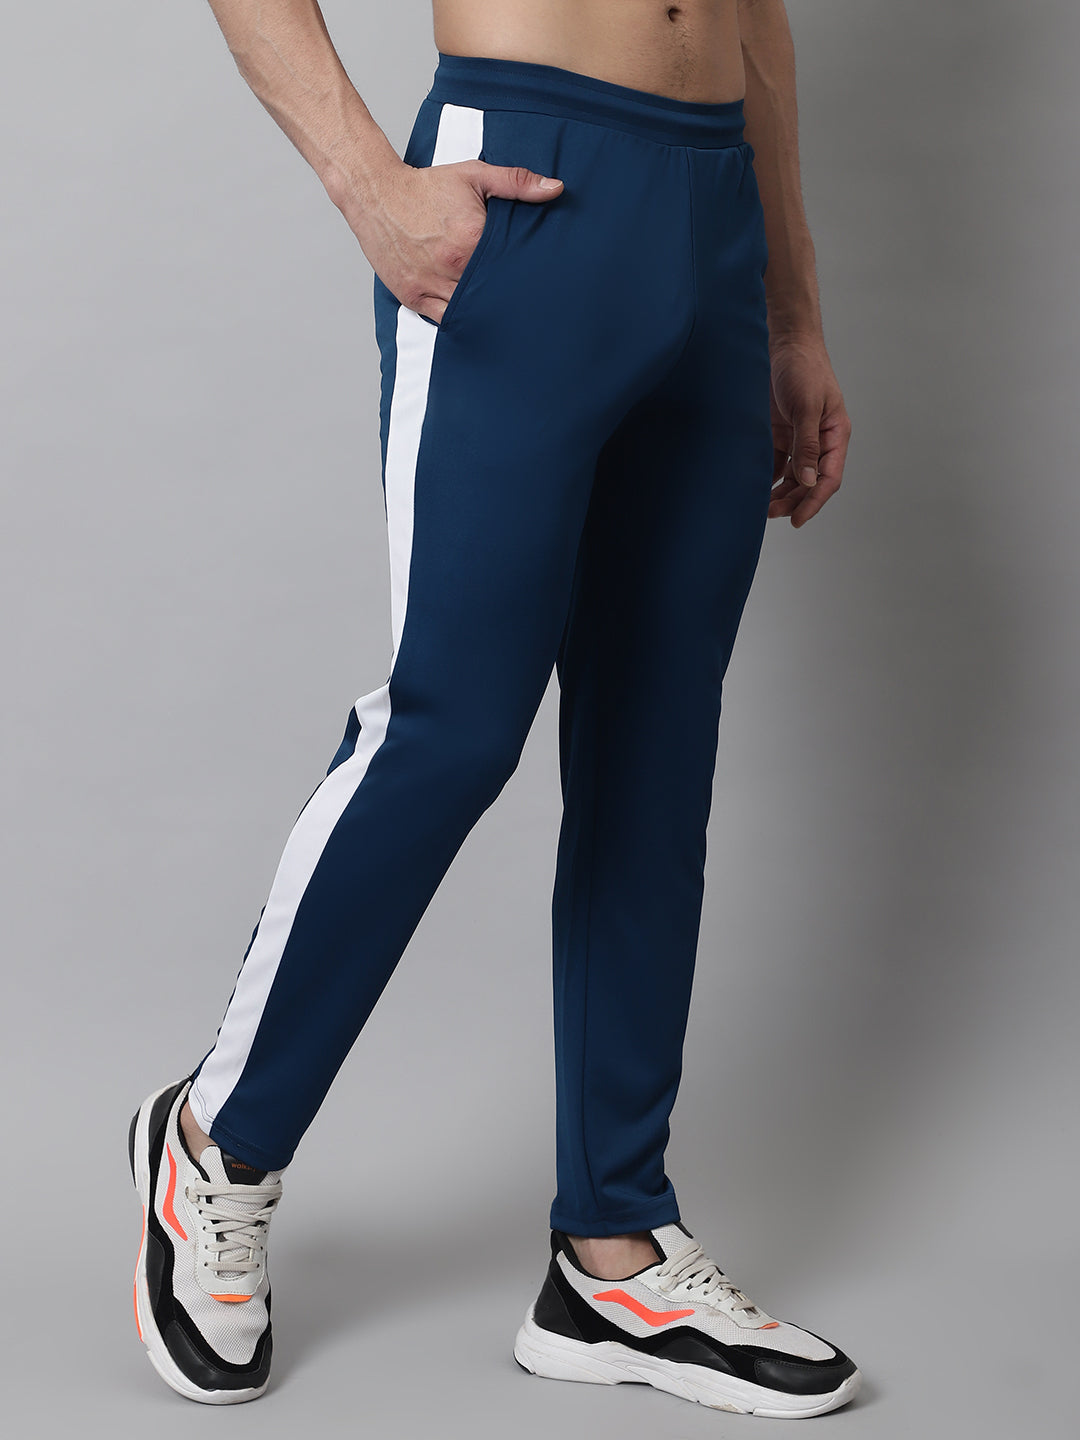 Jainish Men's Peacock Blue and White Striped Streachable Lycra Trackpants - Distacart